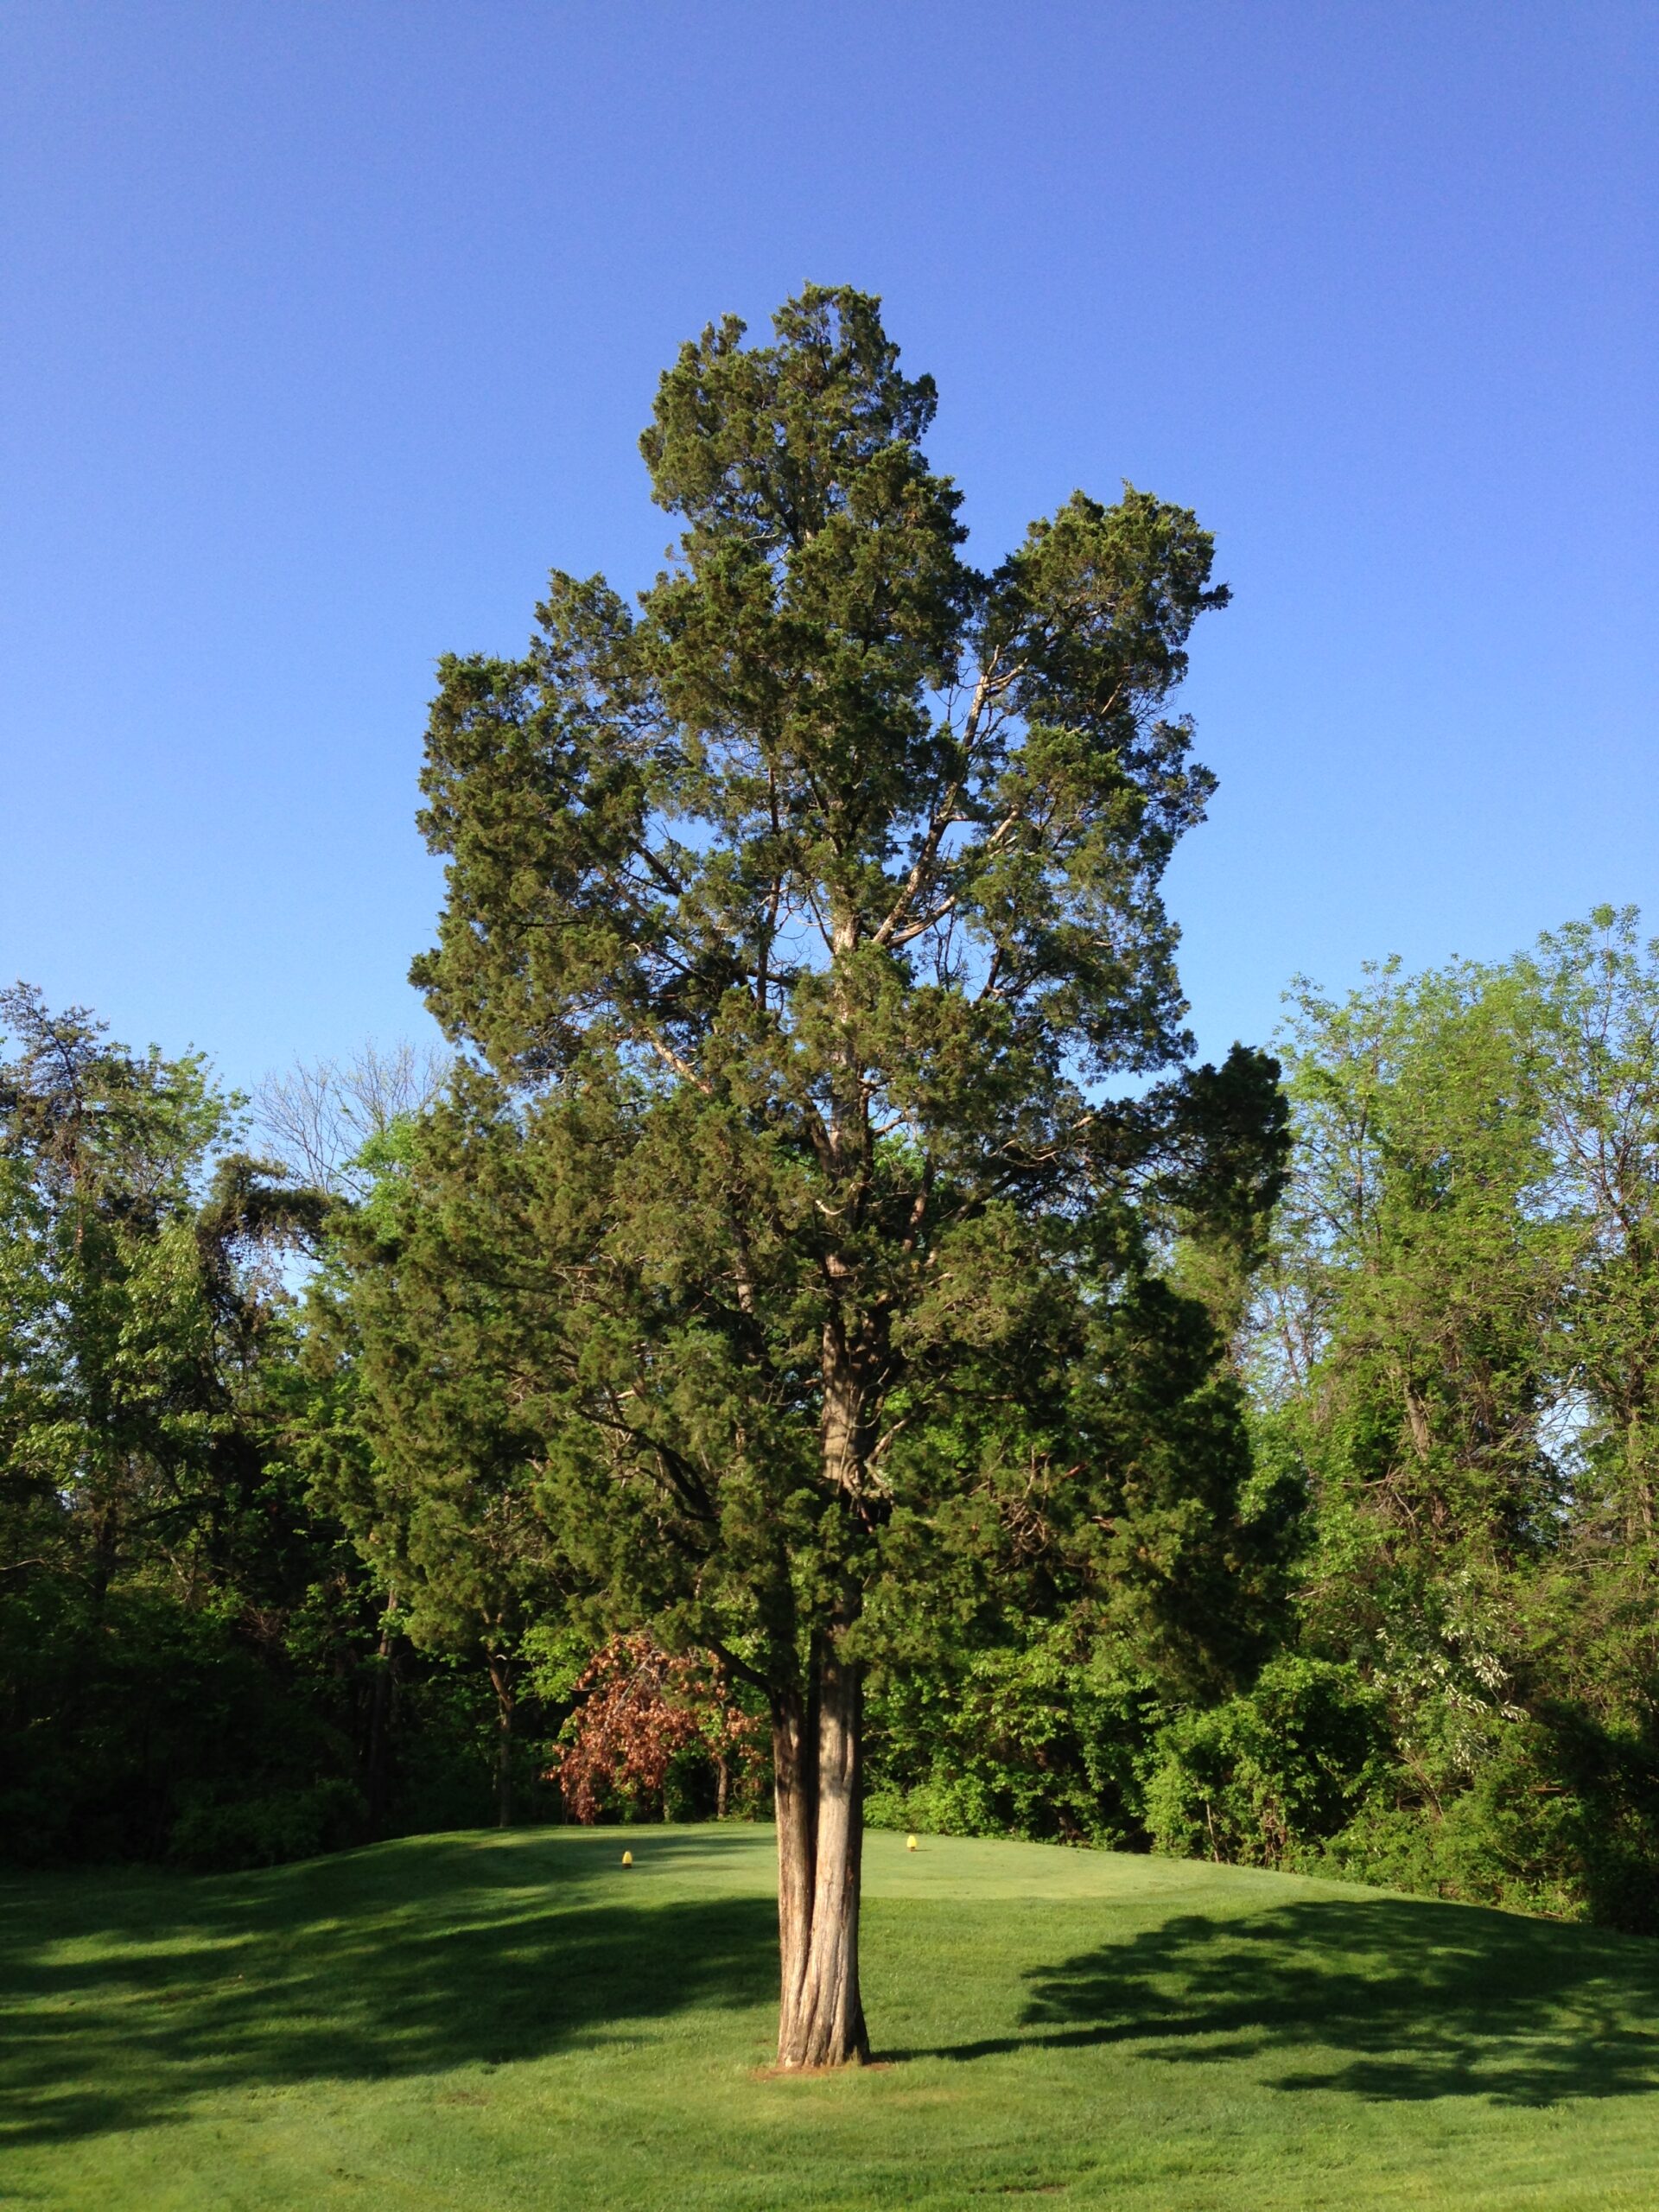 State tree of Tennessee